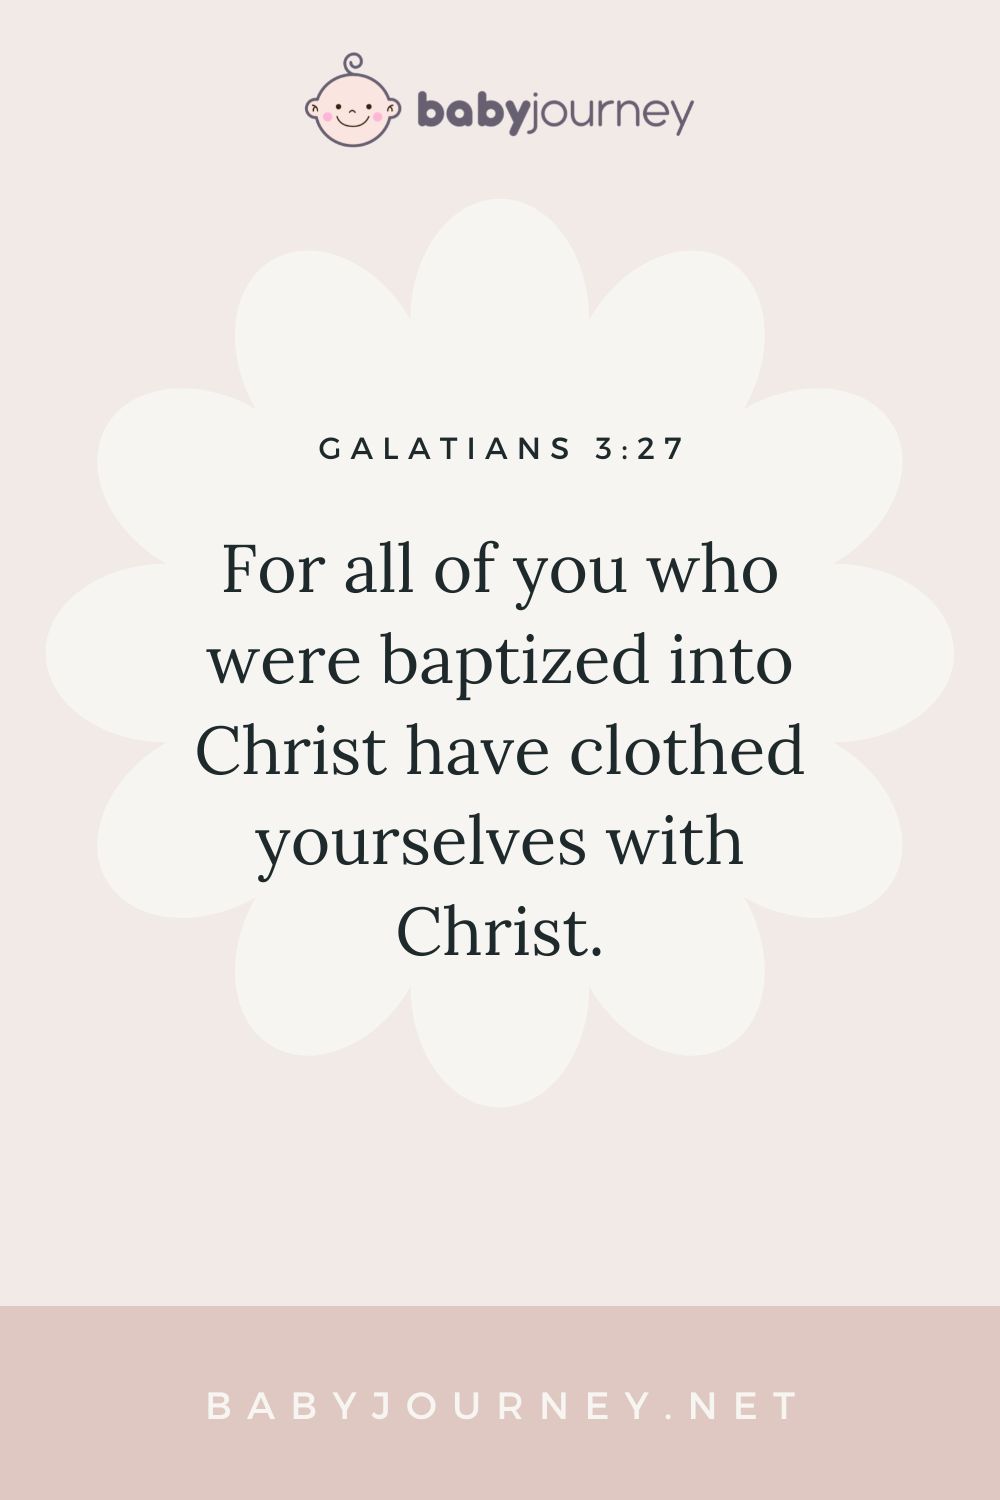 For all of you who were baptized into Christ have clothed yourselves with Christ. Galatians 3:27 - Bible baptism quotes - Baby Journey